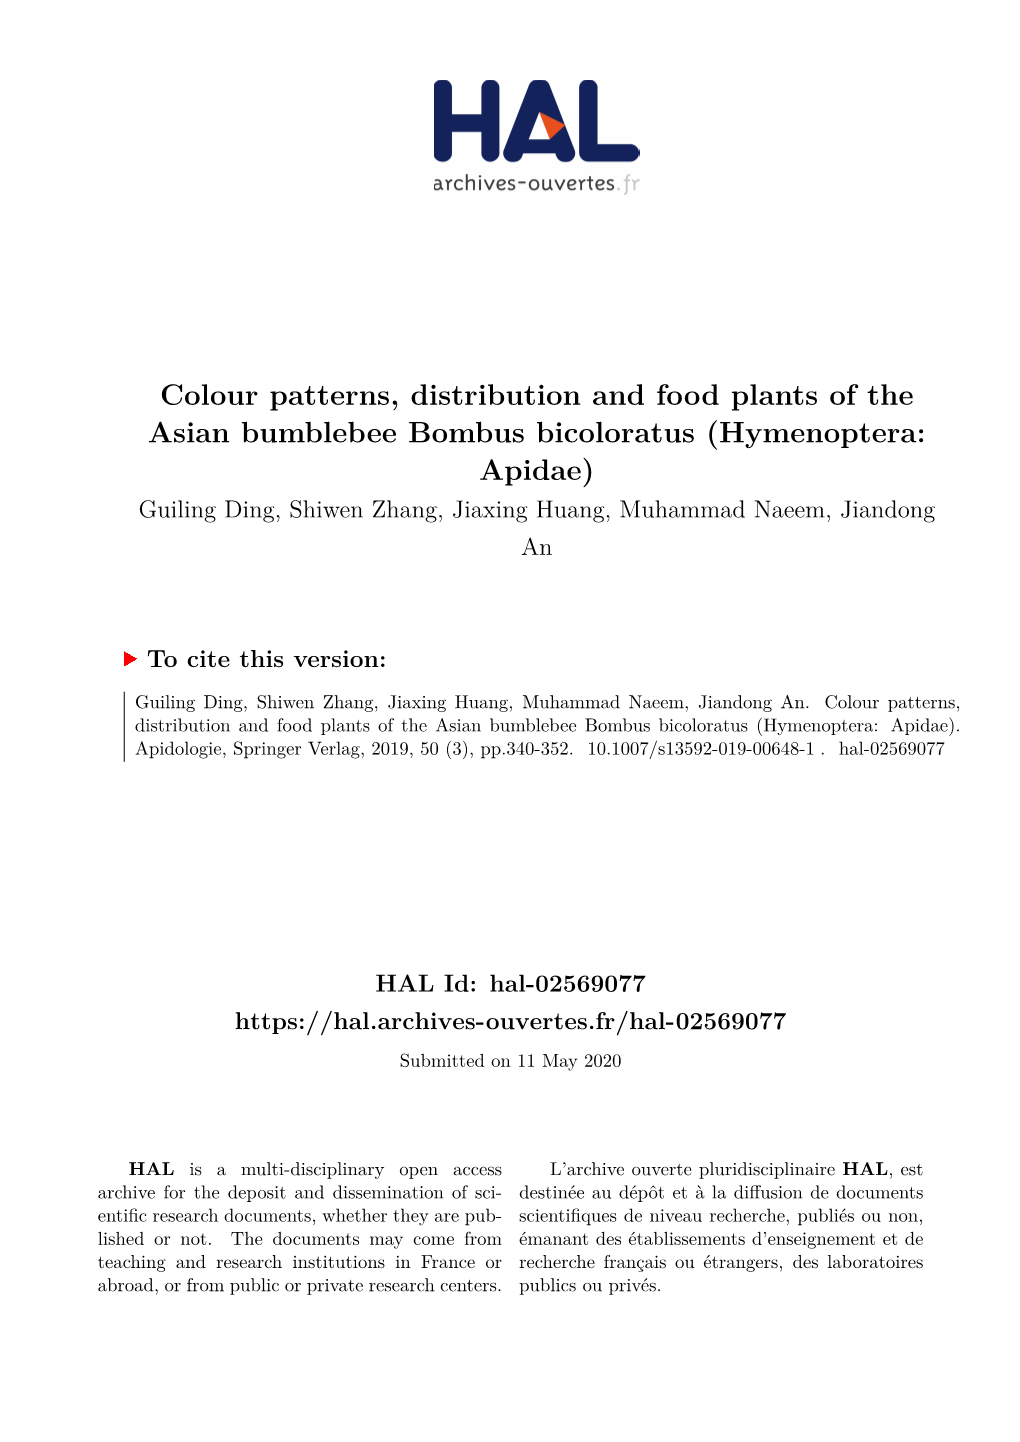 Colour Patterns, Distribution and Food Plants of the Asian Bumblebee